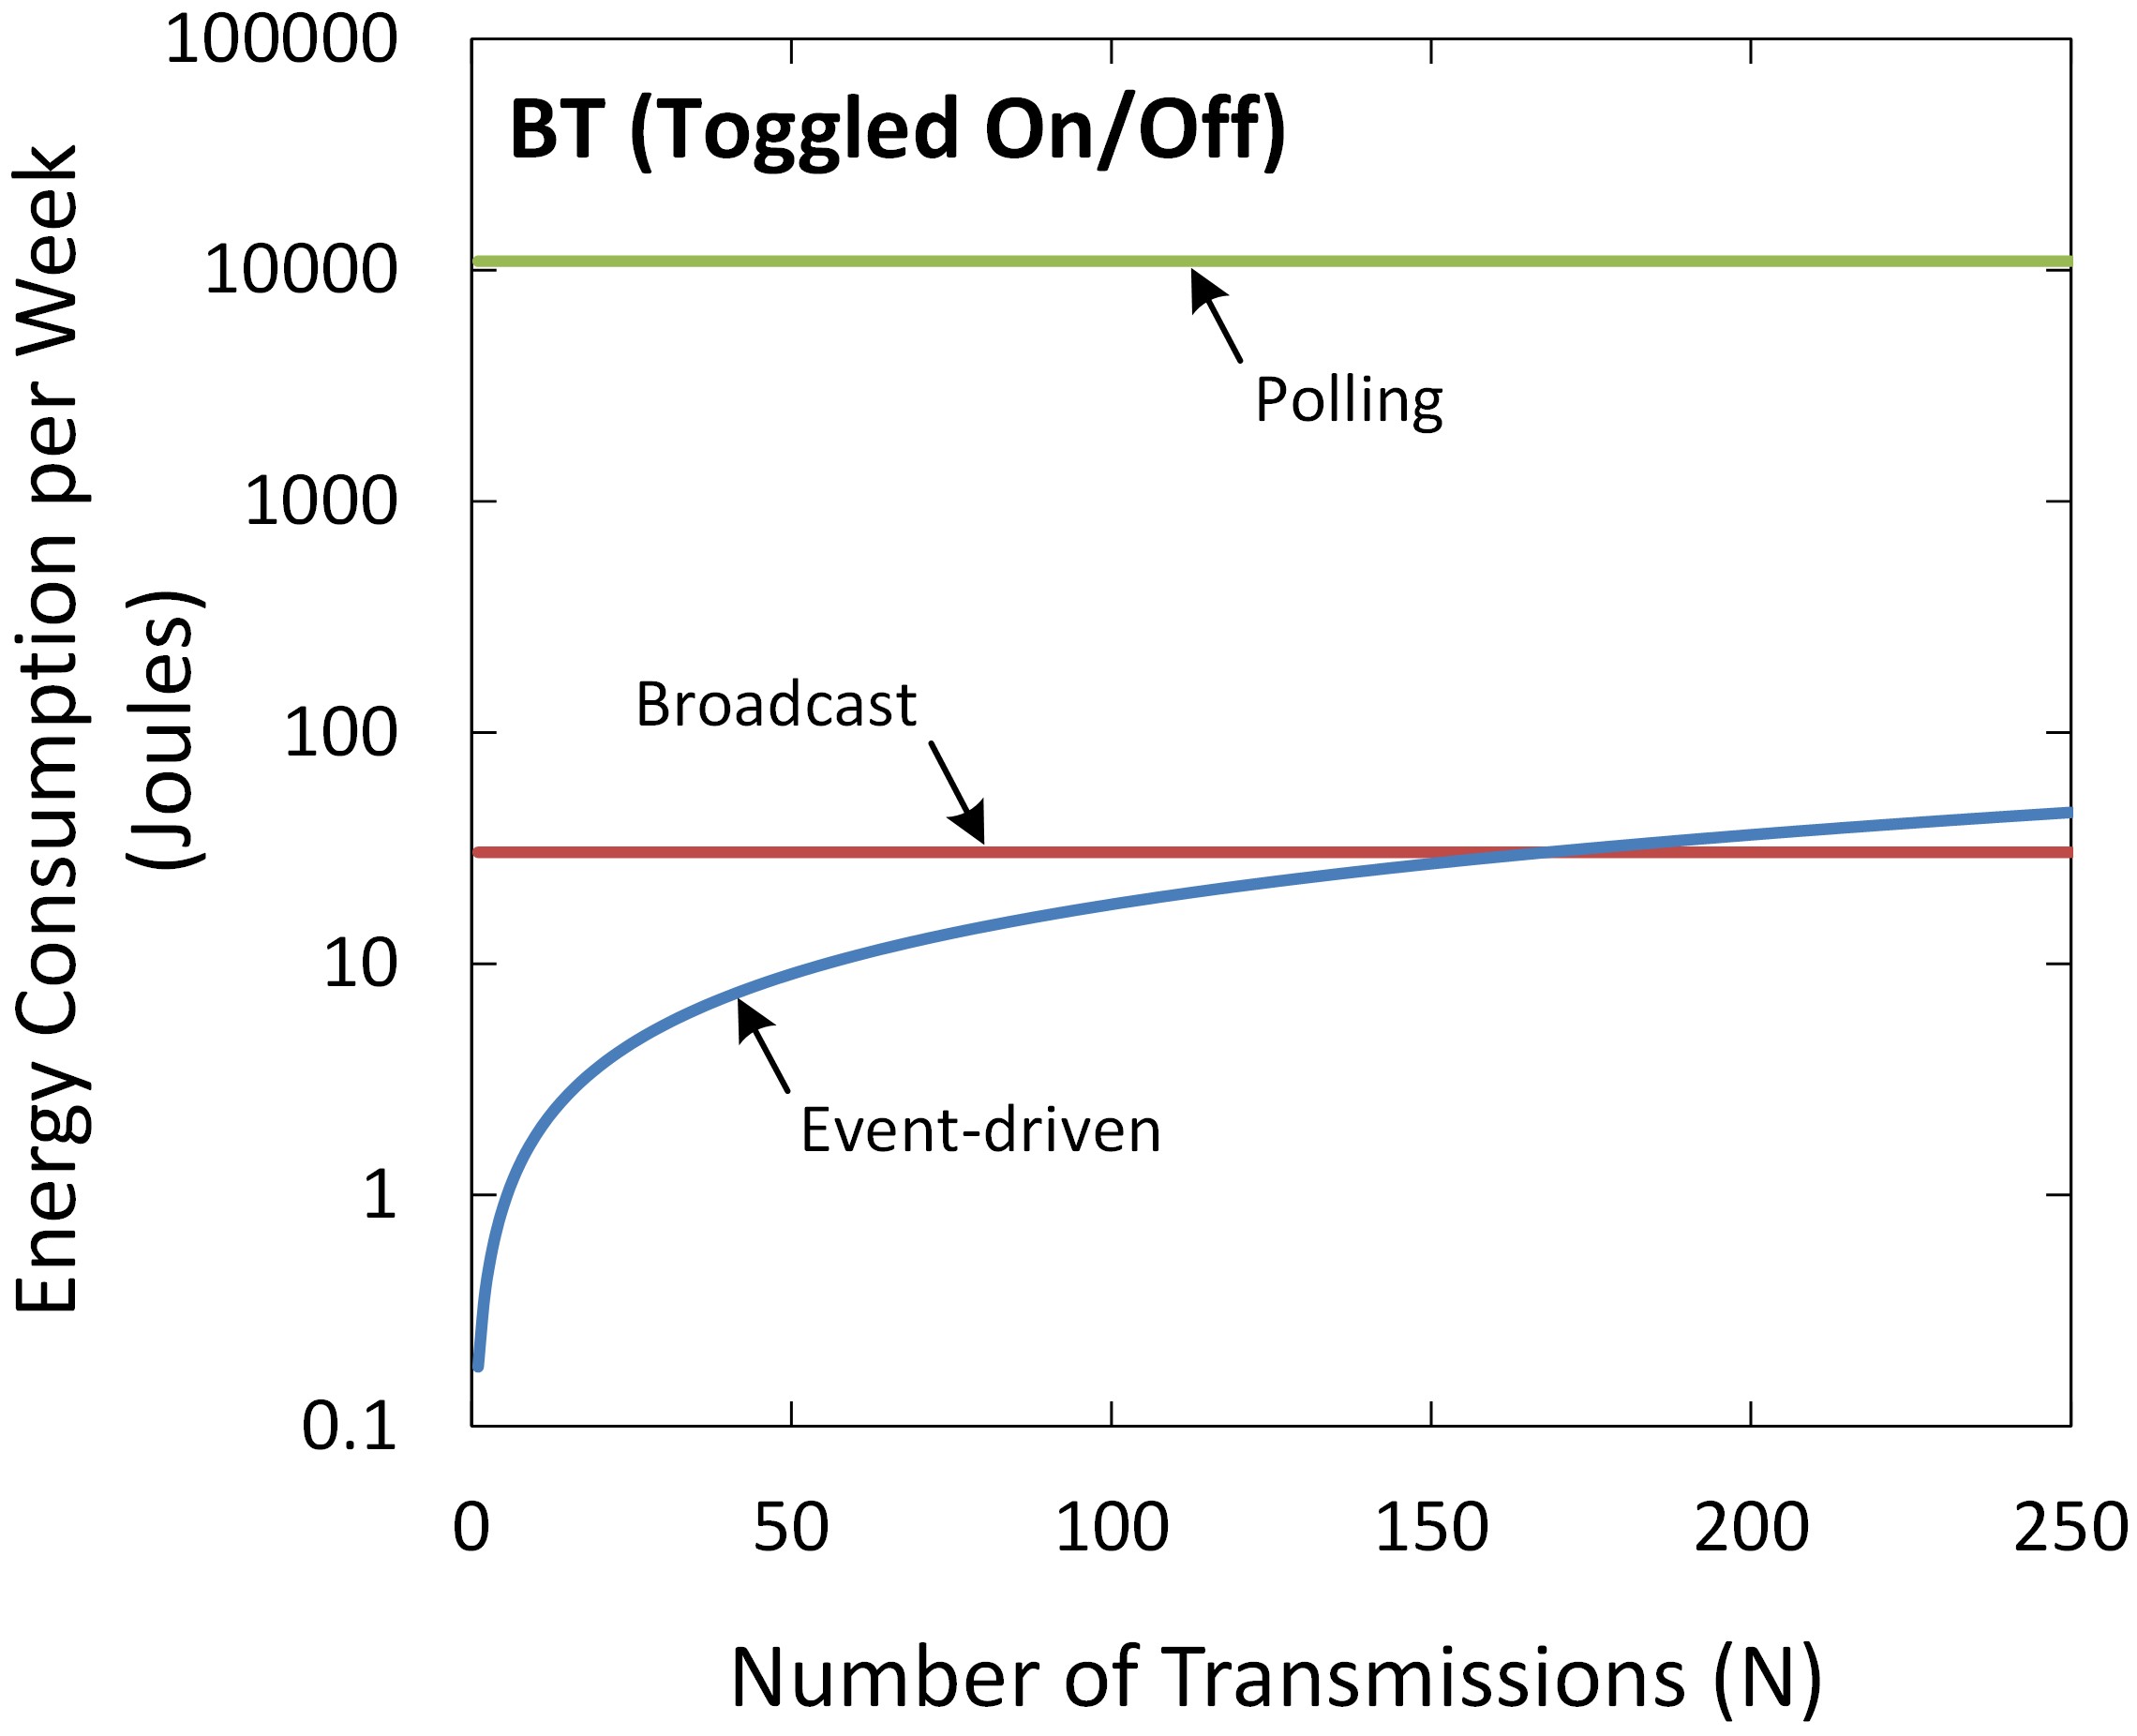 Figure 11. Energy consumption per week of the BT interface (toggled on/off).